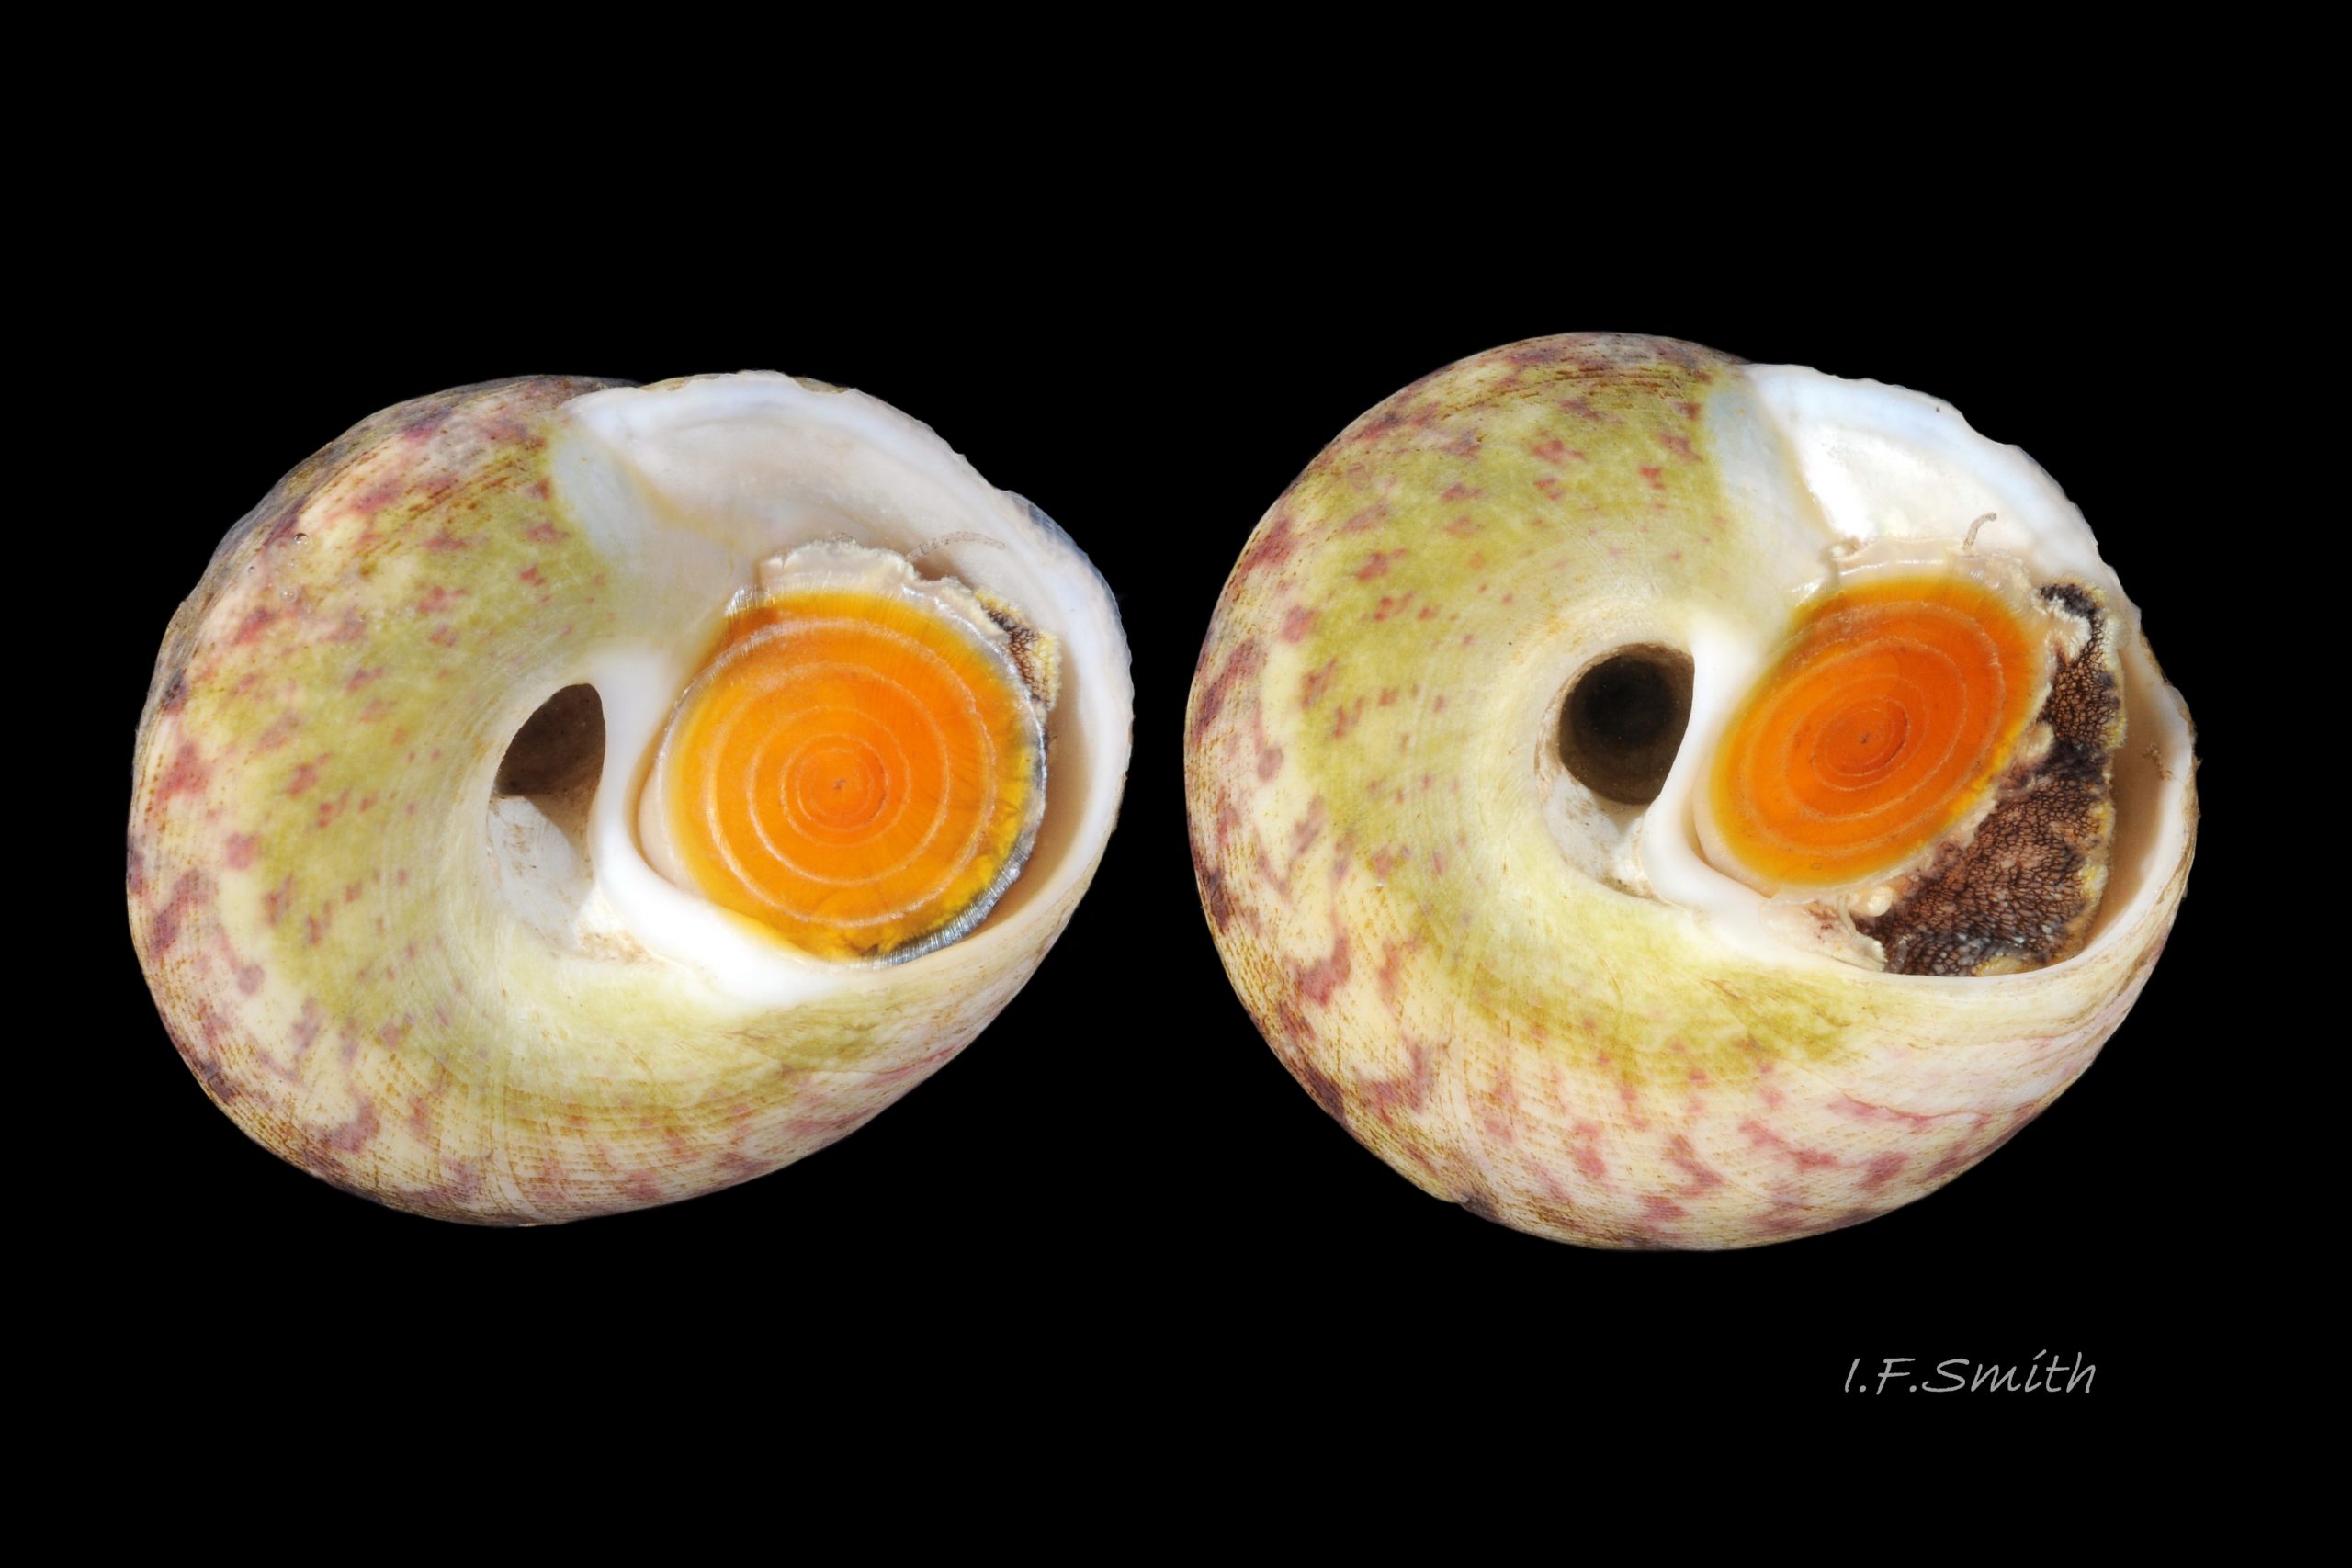 06 Gibbula magus. Height 19 mm, breadth 25 mm. Cardigan Bay, Wales. 2015.